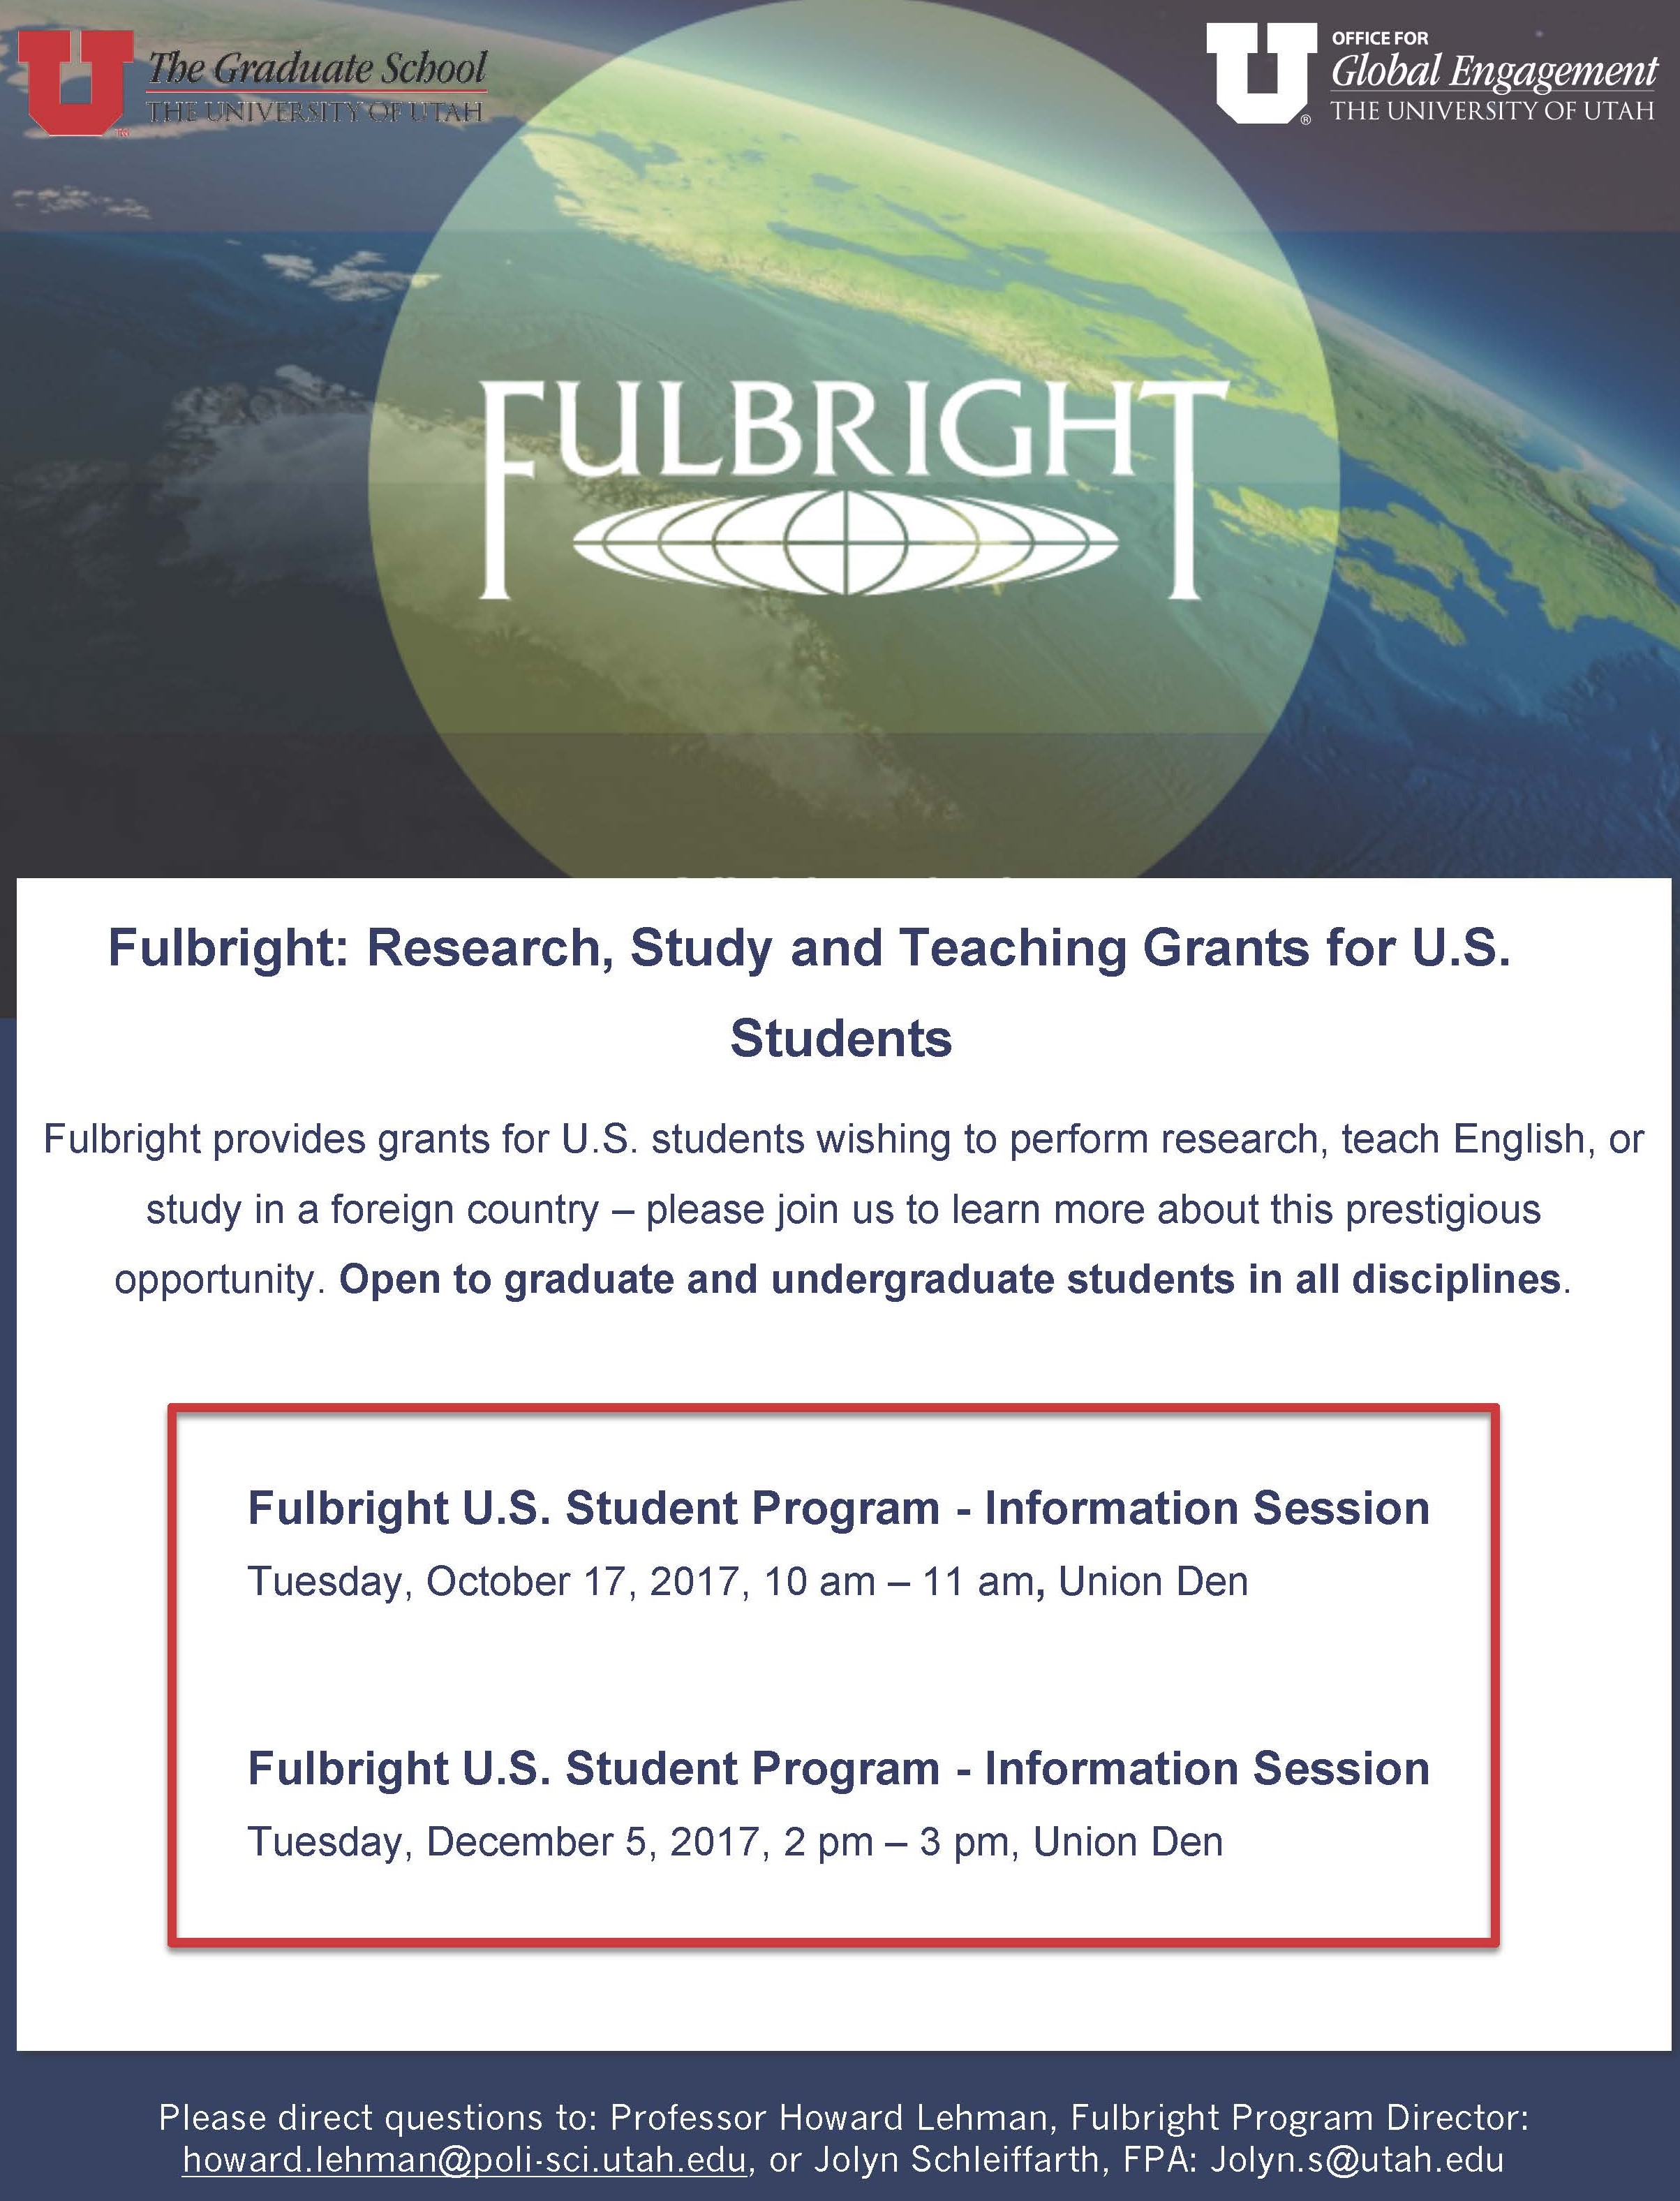 Fulbright Research, Study and Teaching Grants for U.S. Students